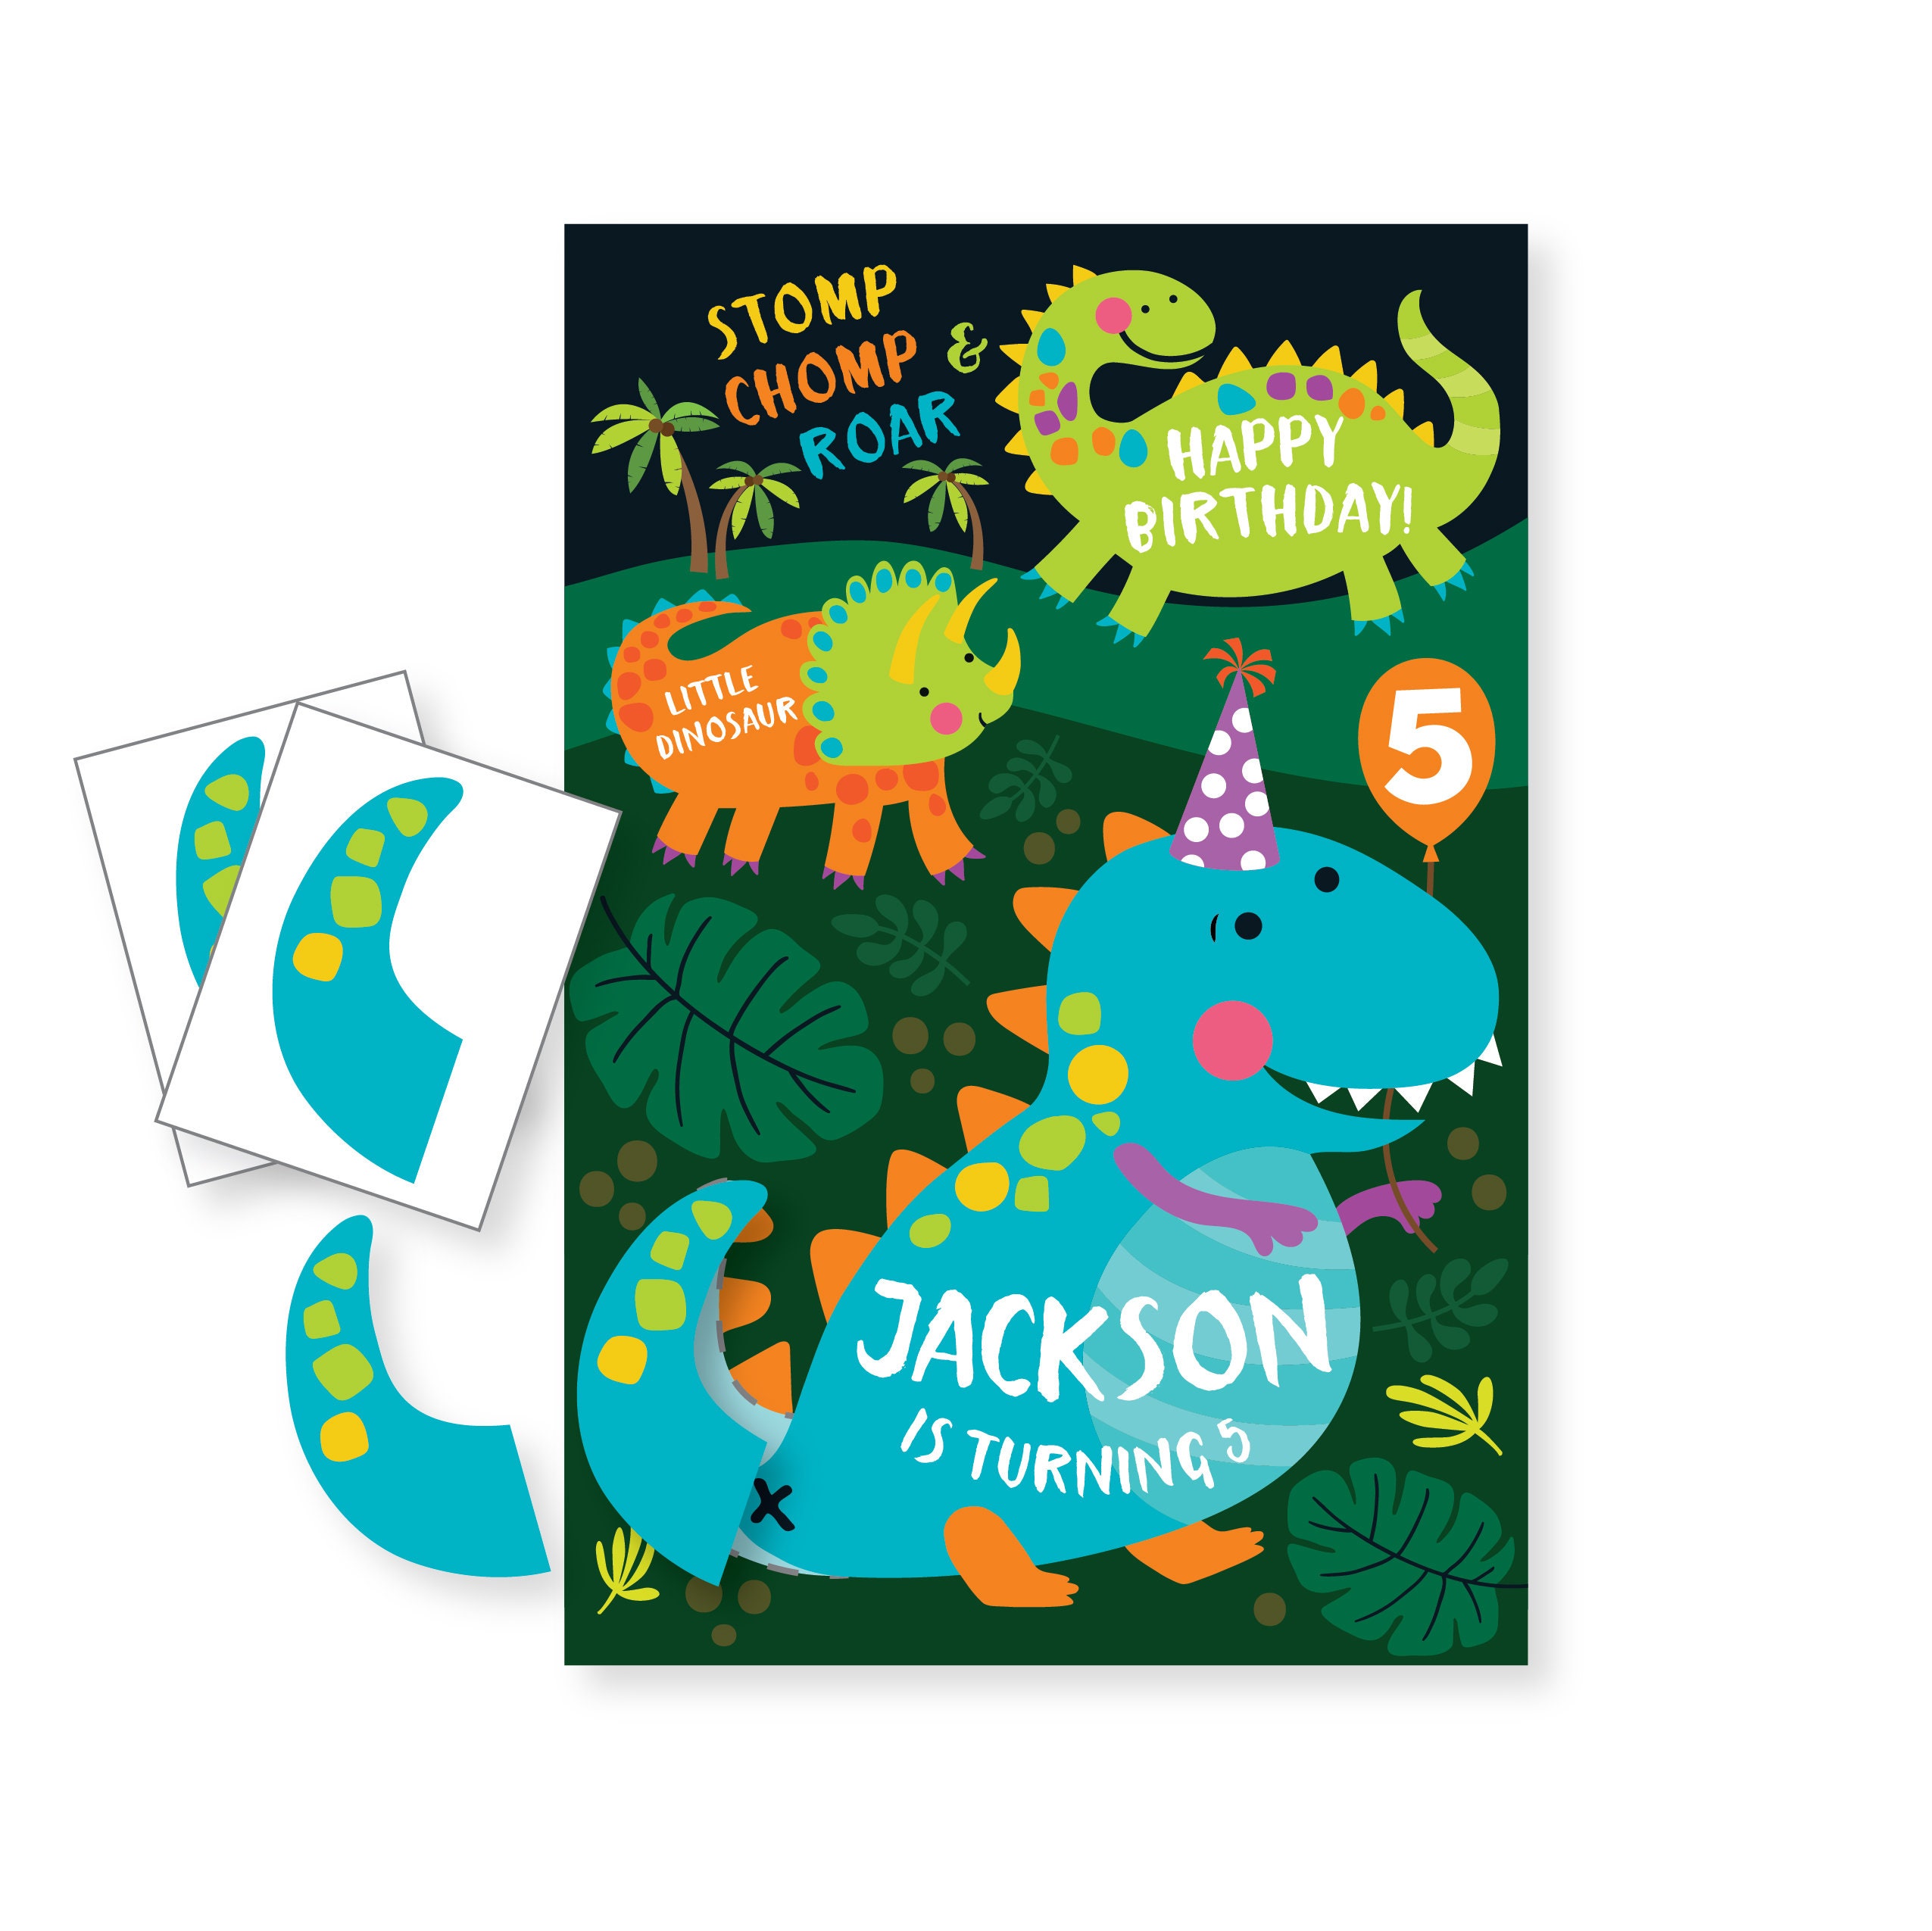 Outus Dinosaur Theme Party Games Pin The Tail on The Dinosaur Game Birthday  Party Game Circus Pin Game and Activities for Boys Girls Dinosaur Theme